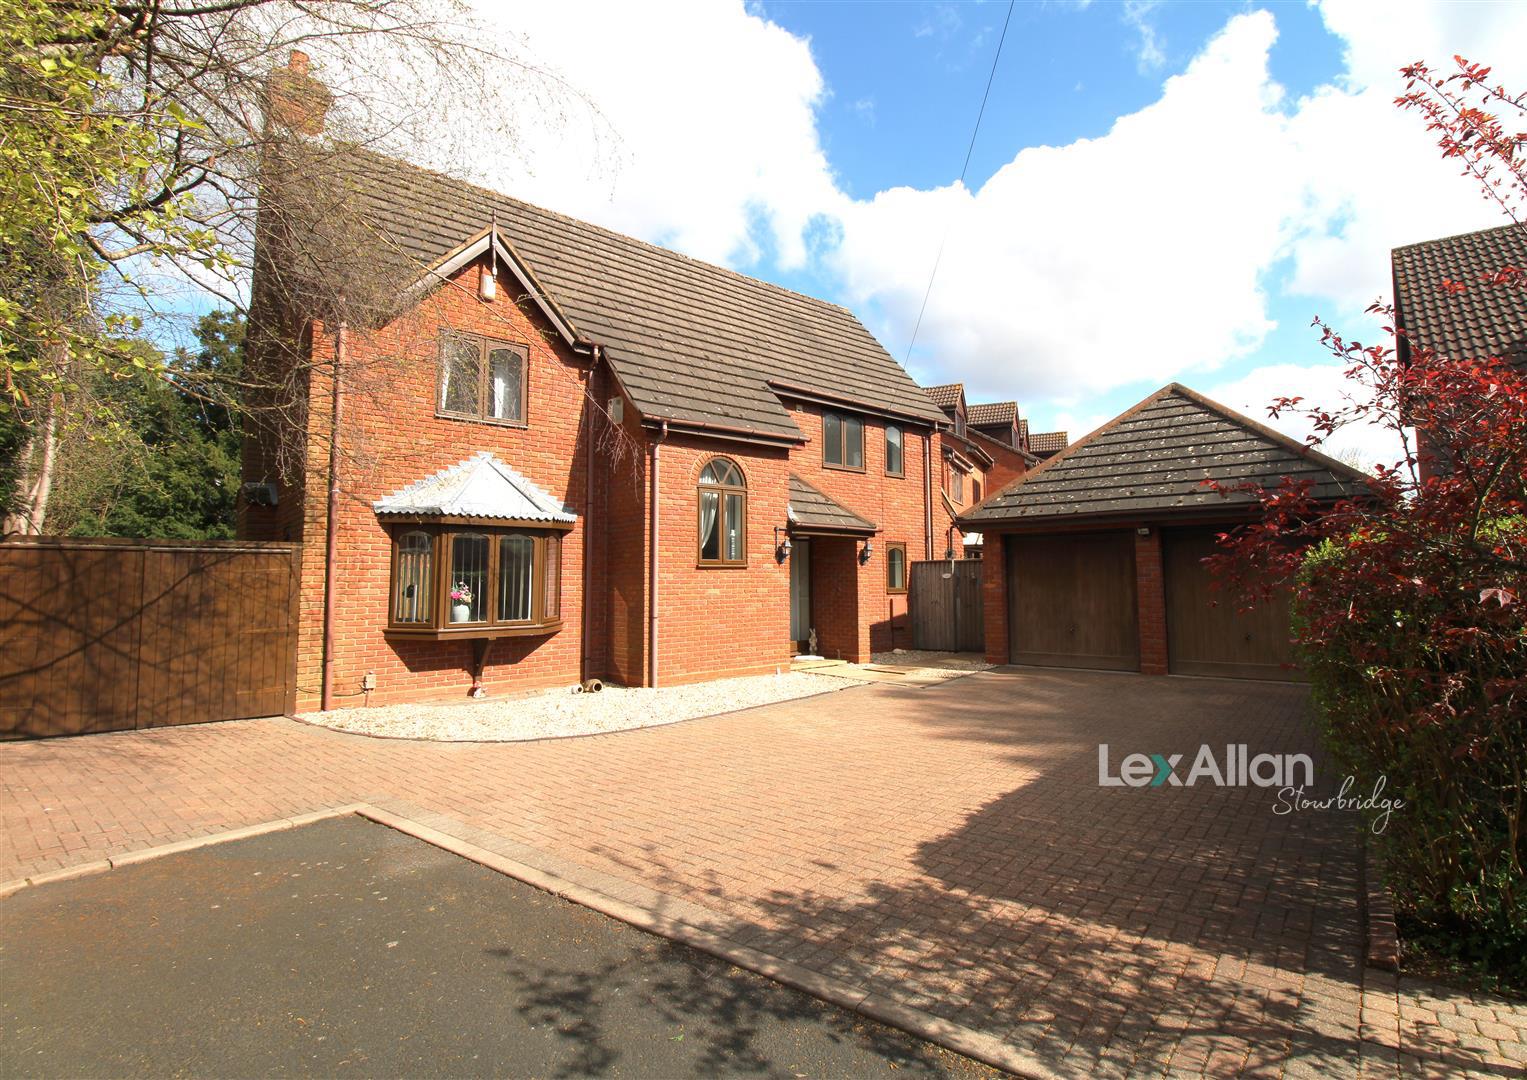 4 bed detached house for sale in Hillville Gardens, Stourbridge, DY8 